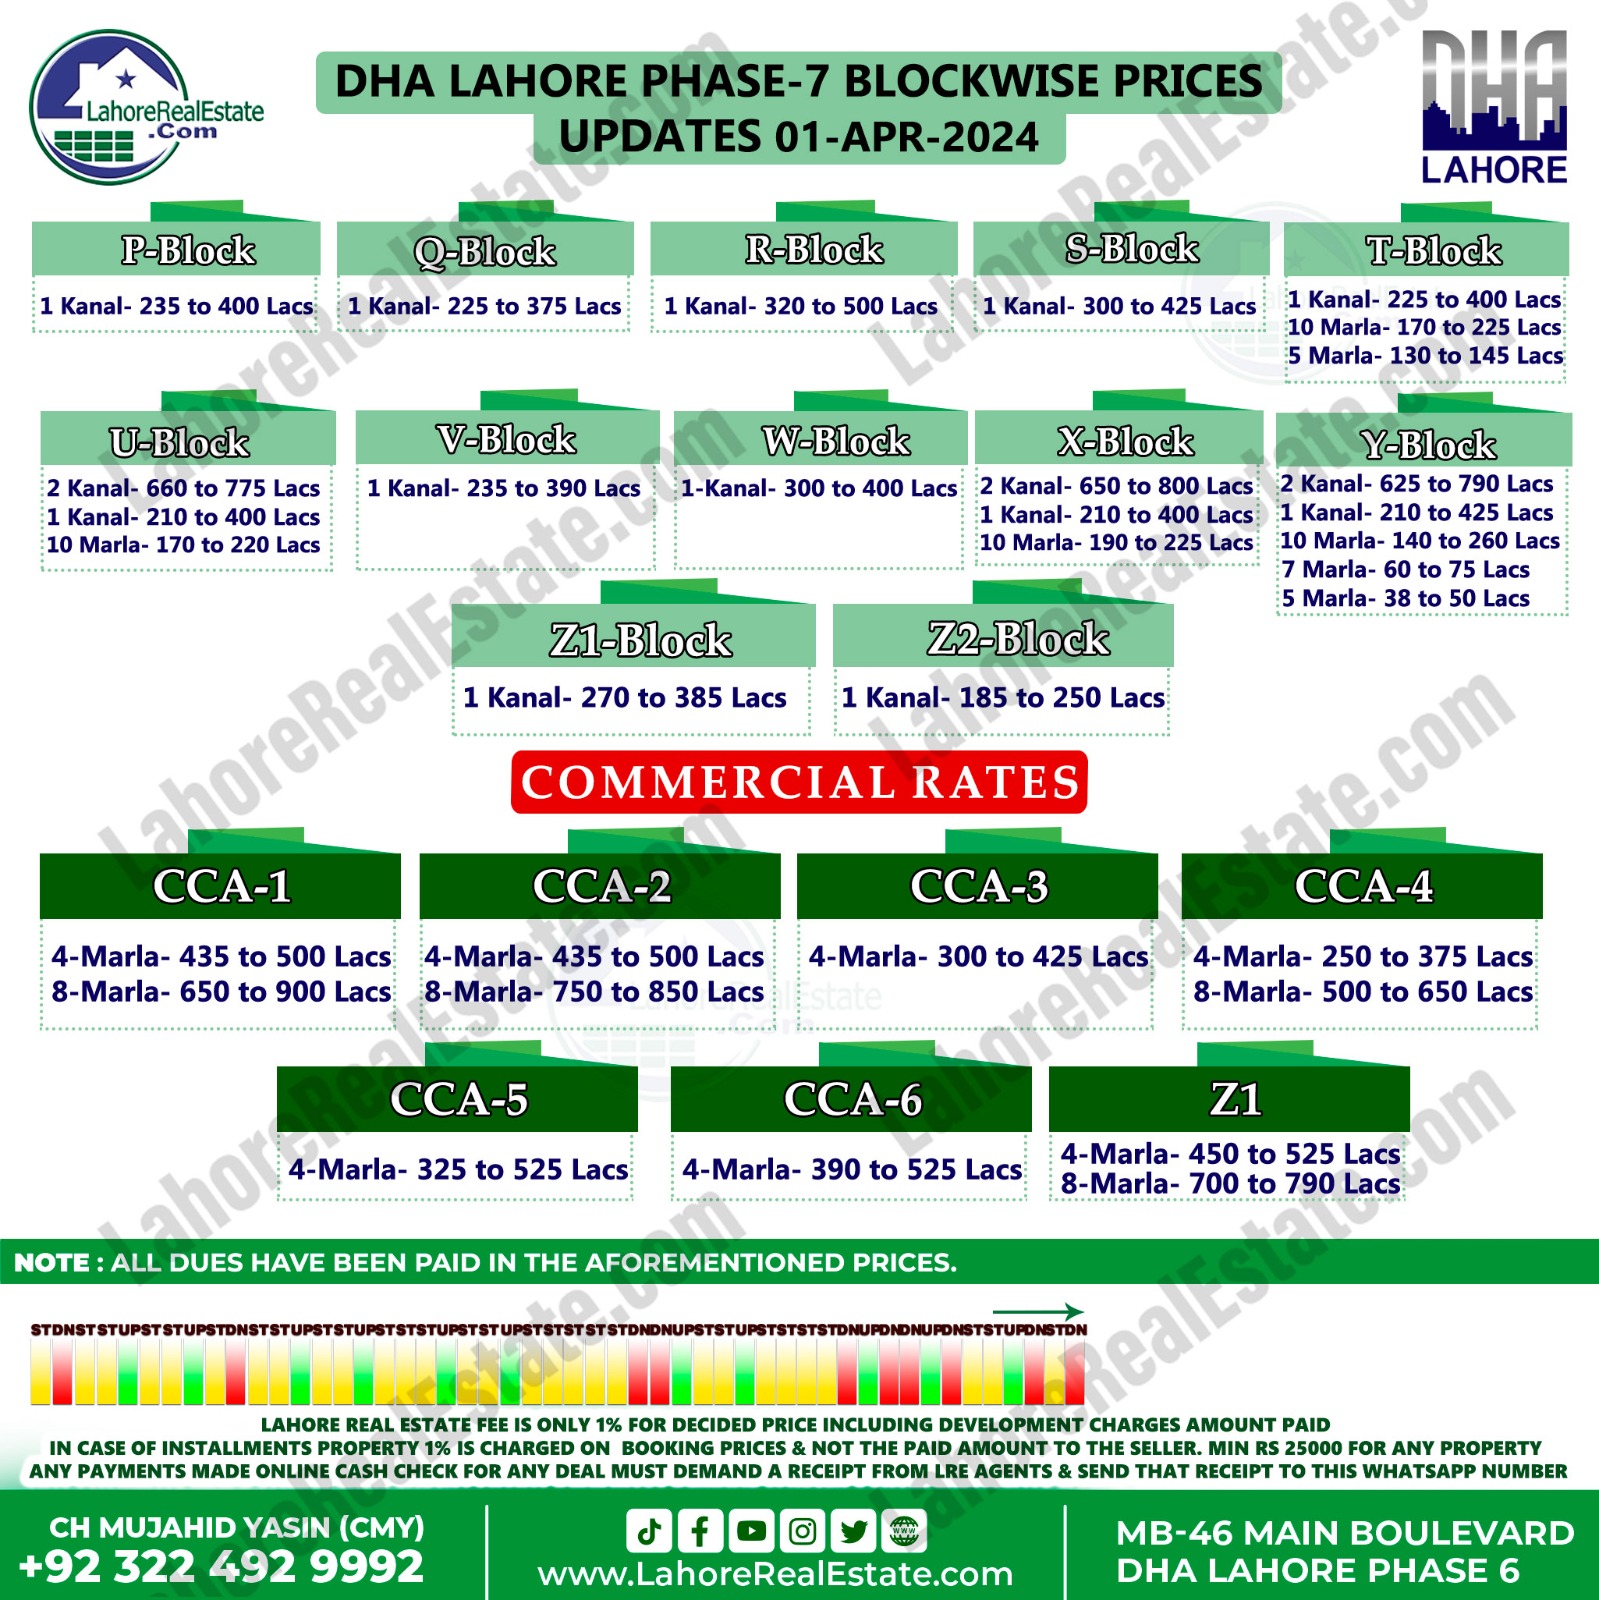 DHA Lahore Phase 7 Plot Prices Update April 01, 2024